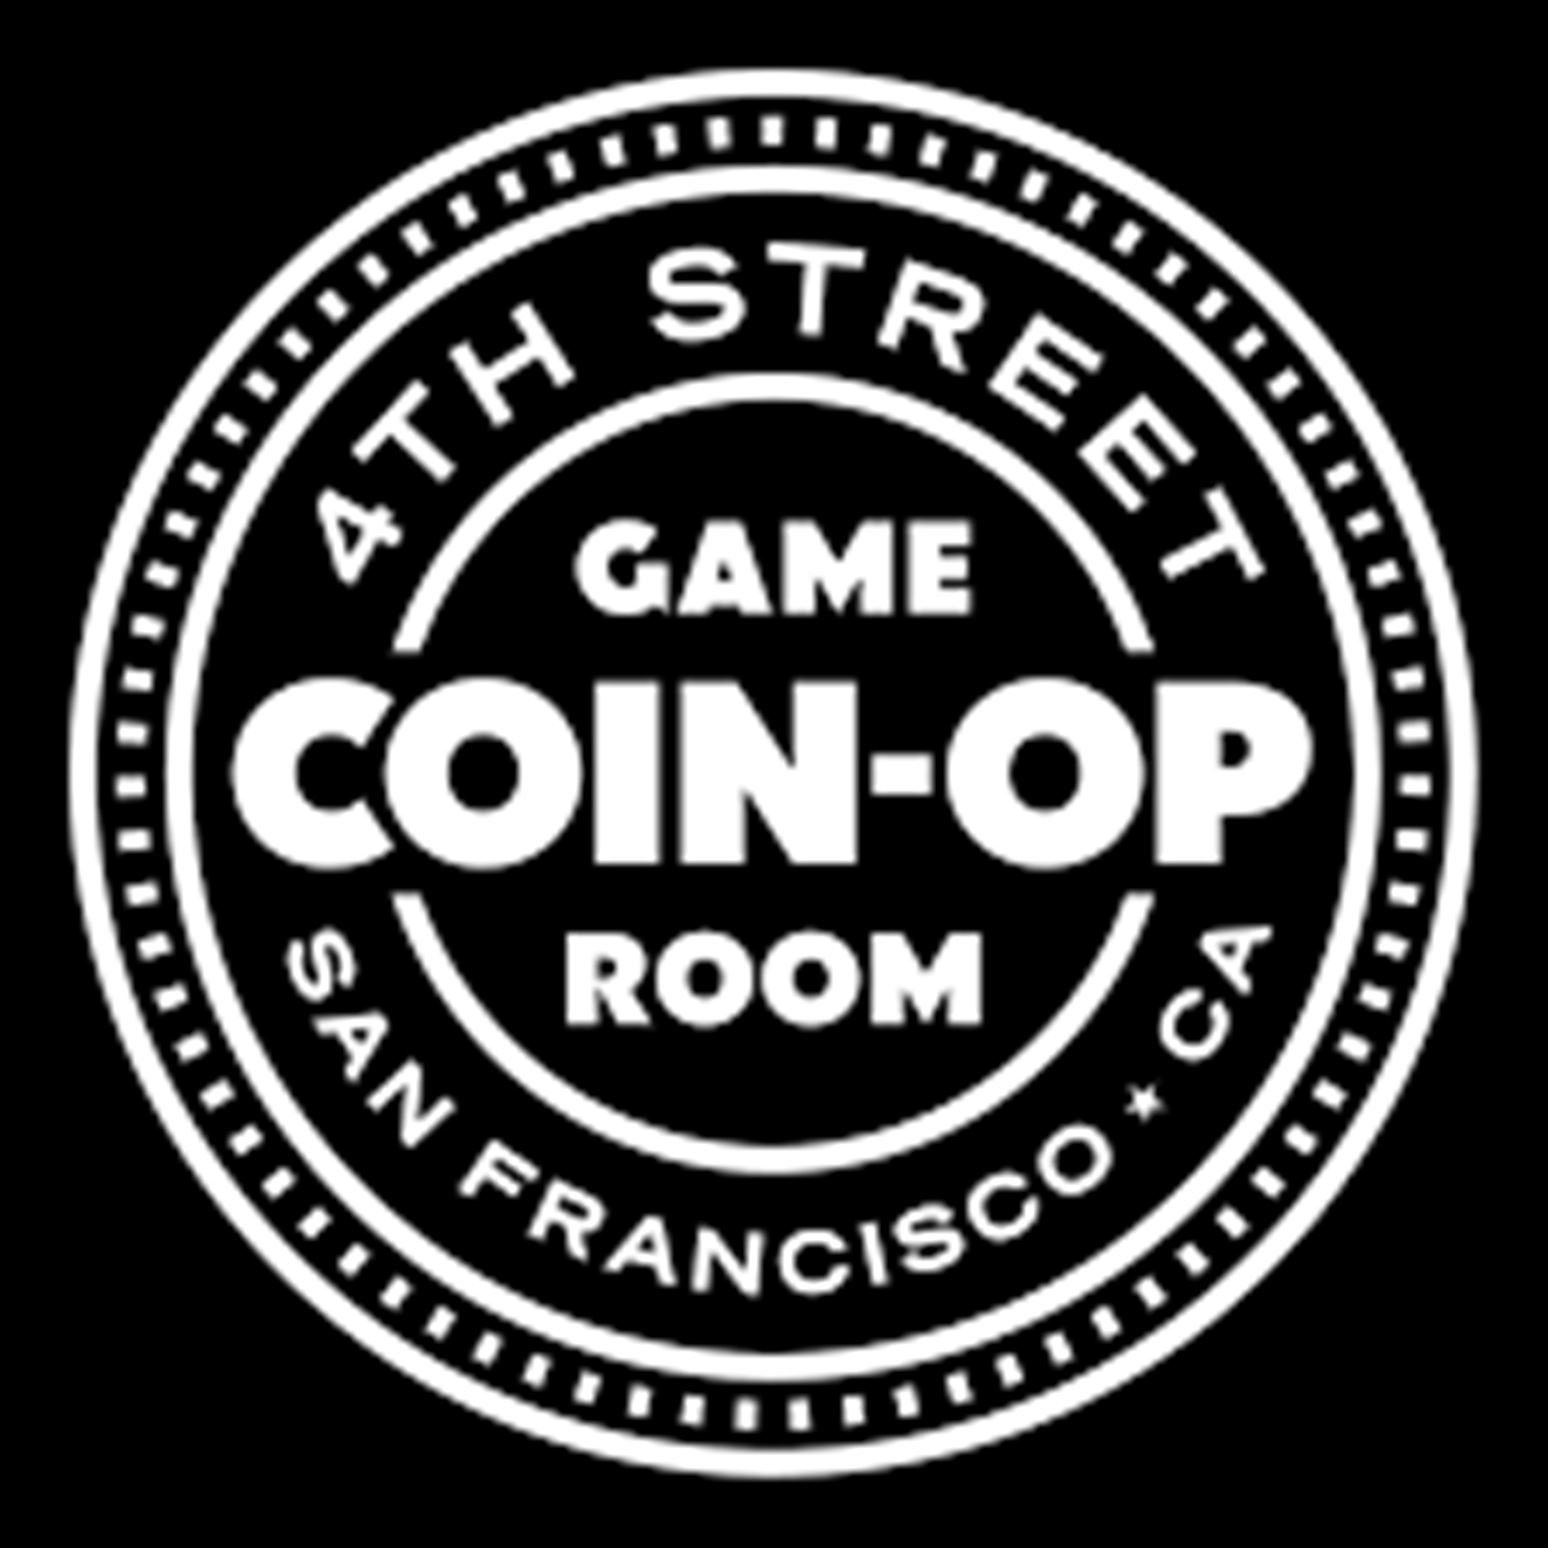 Coin-Op Game Room, 508 4th St, San Francisco